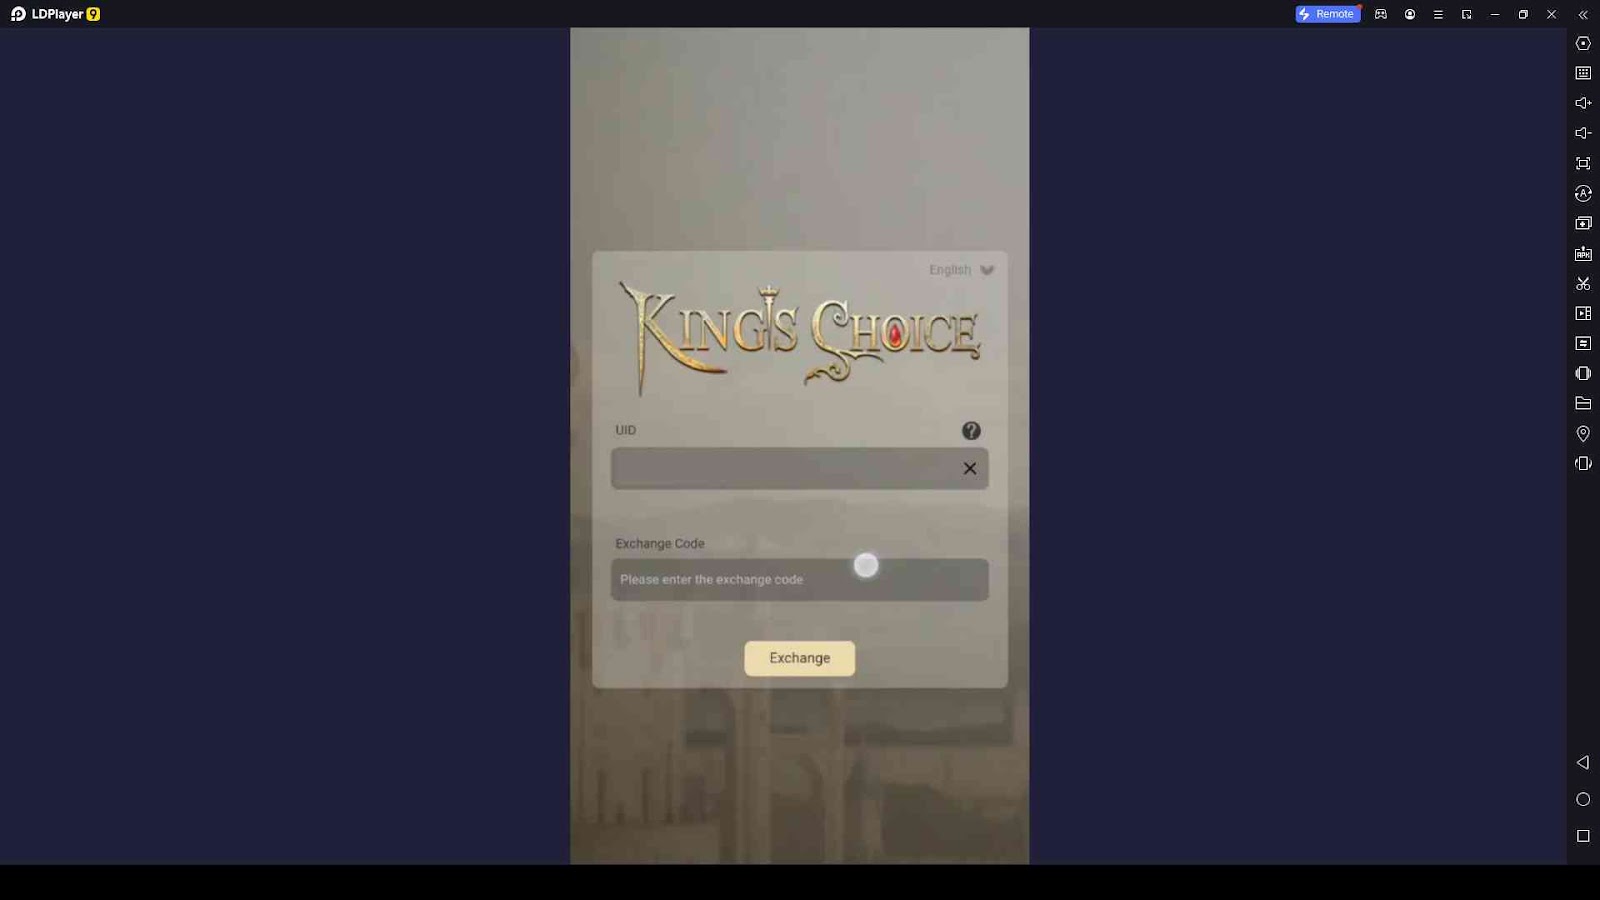 Redeeming Process for the Codes in King's Choice